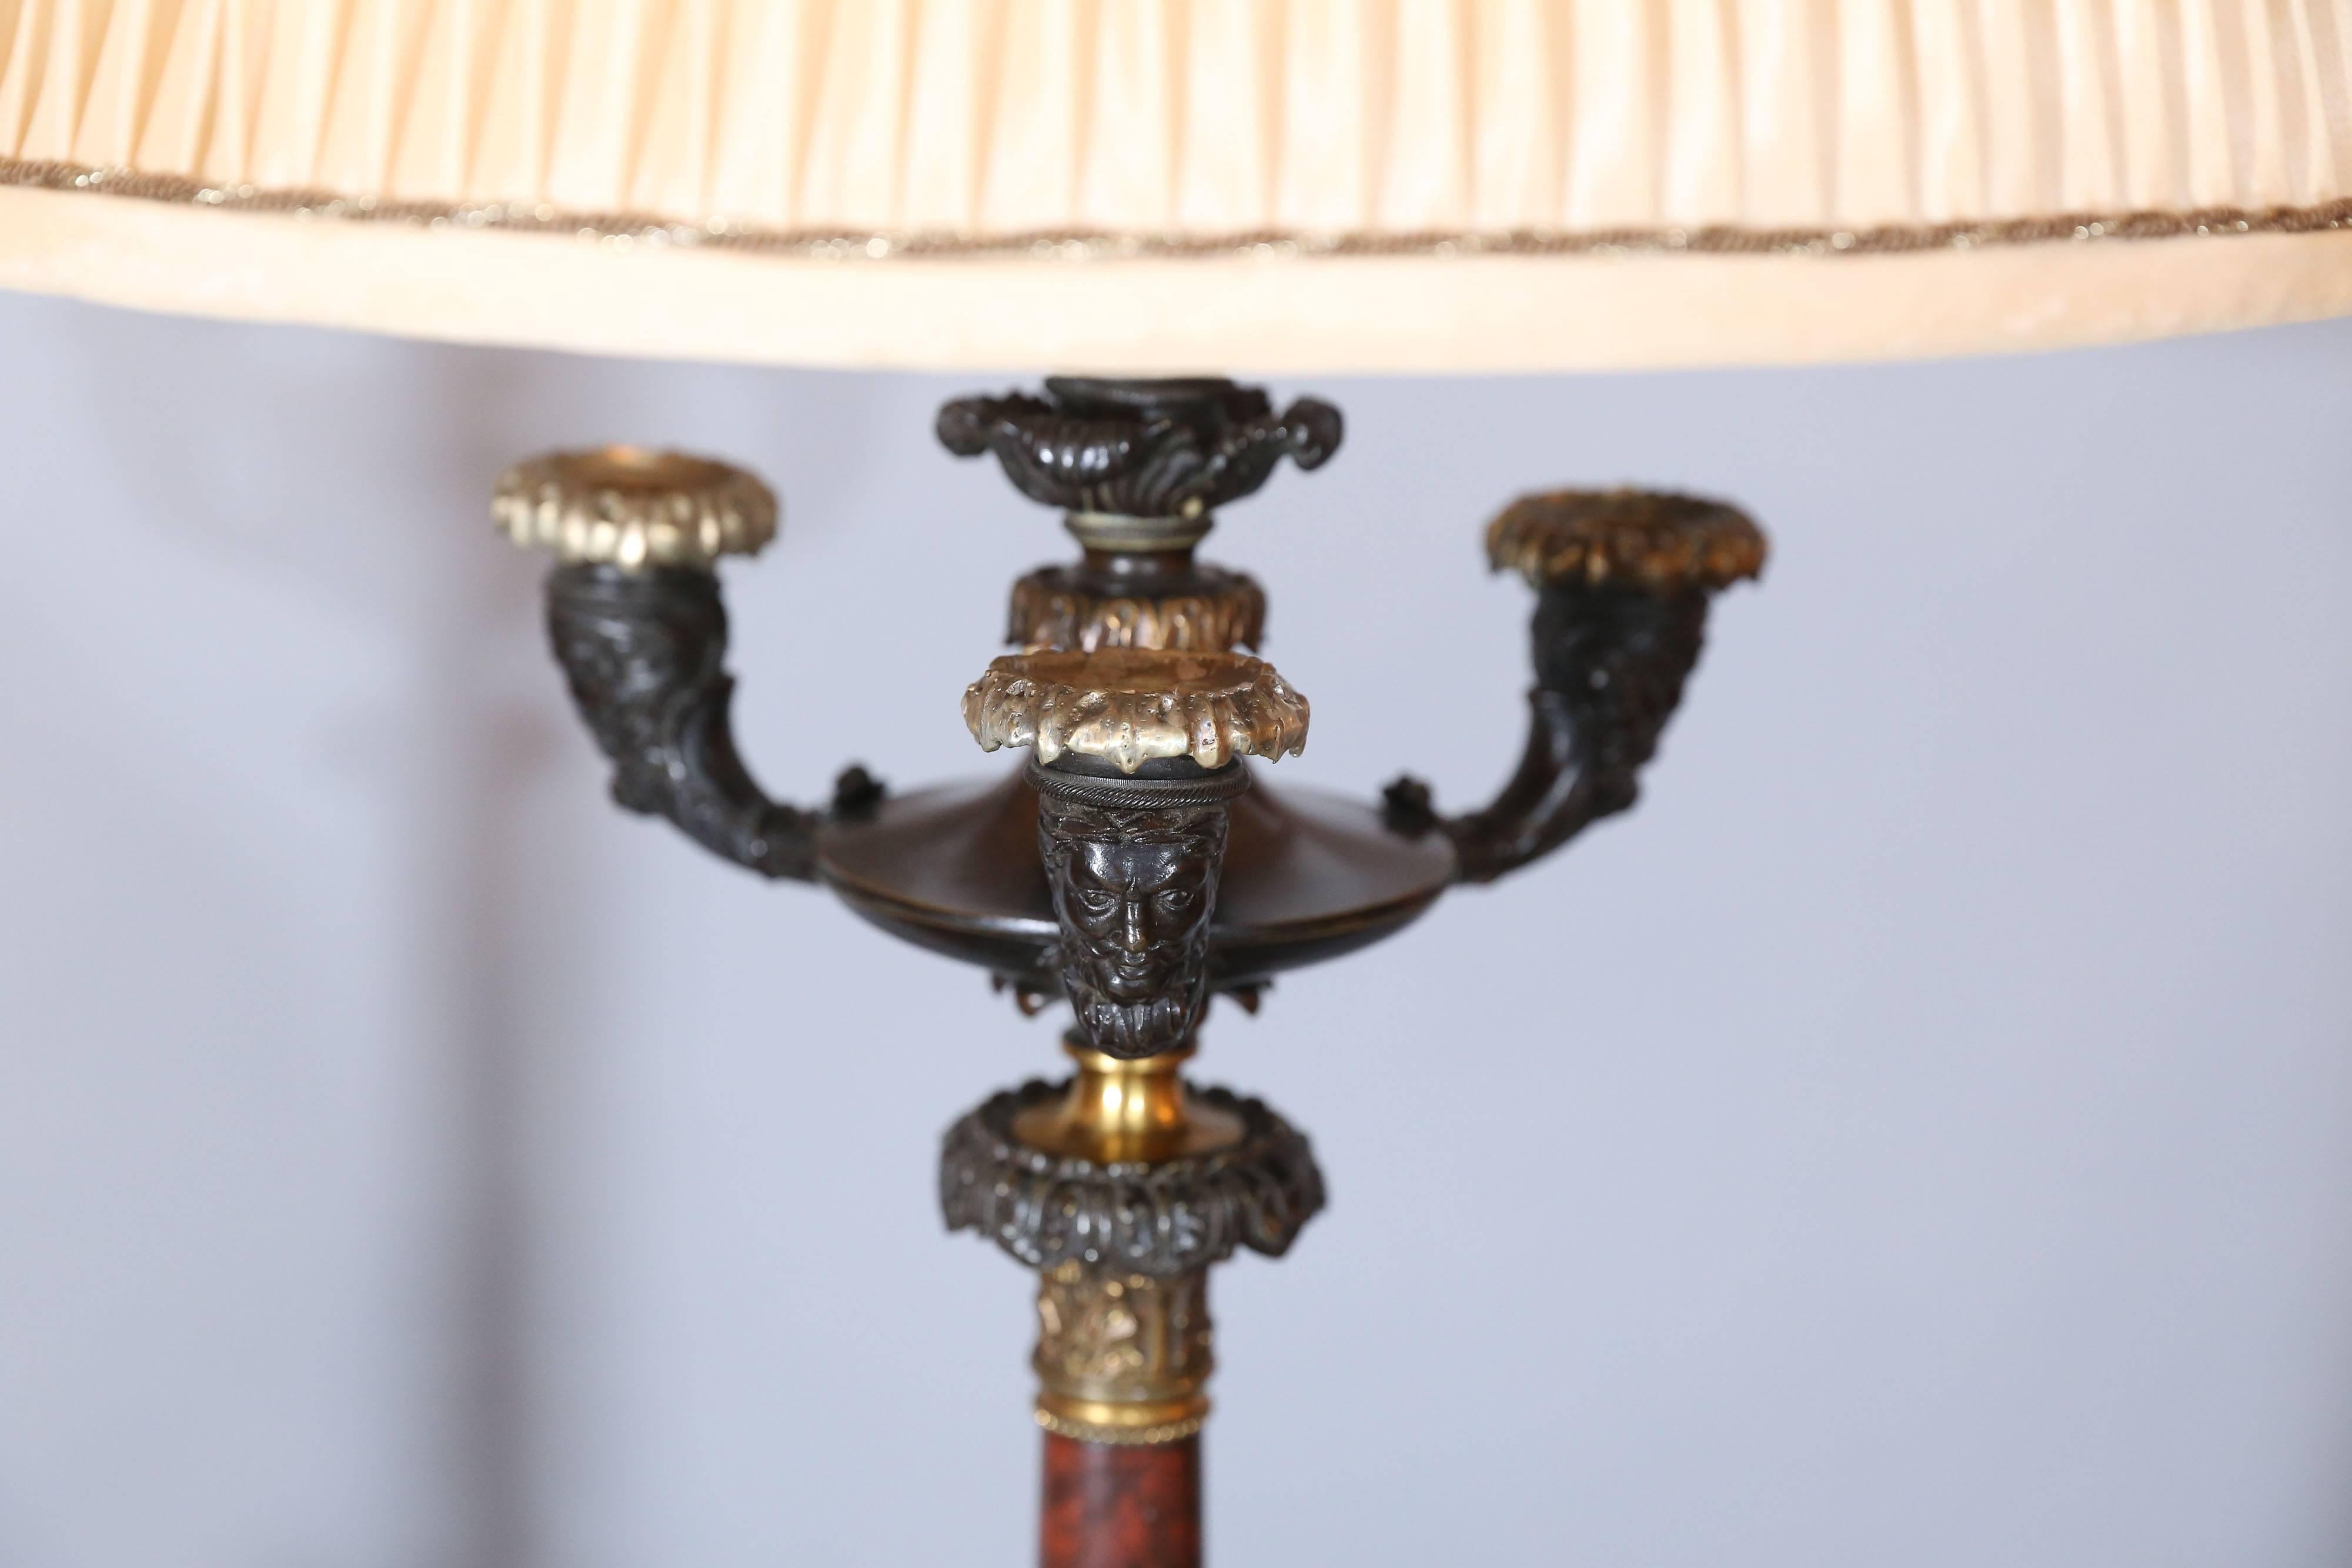 Tall pair of Regency four-light bronze repousse and marble candelabra with three mask head arms, above a marble standard.

Each arm holds a bobeche.

Center arm is wired leaving three-arm for candles.

Base is a two-part tripod with sleeve for